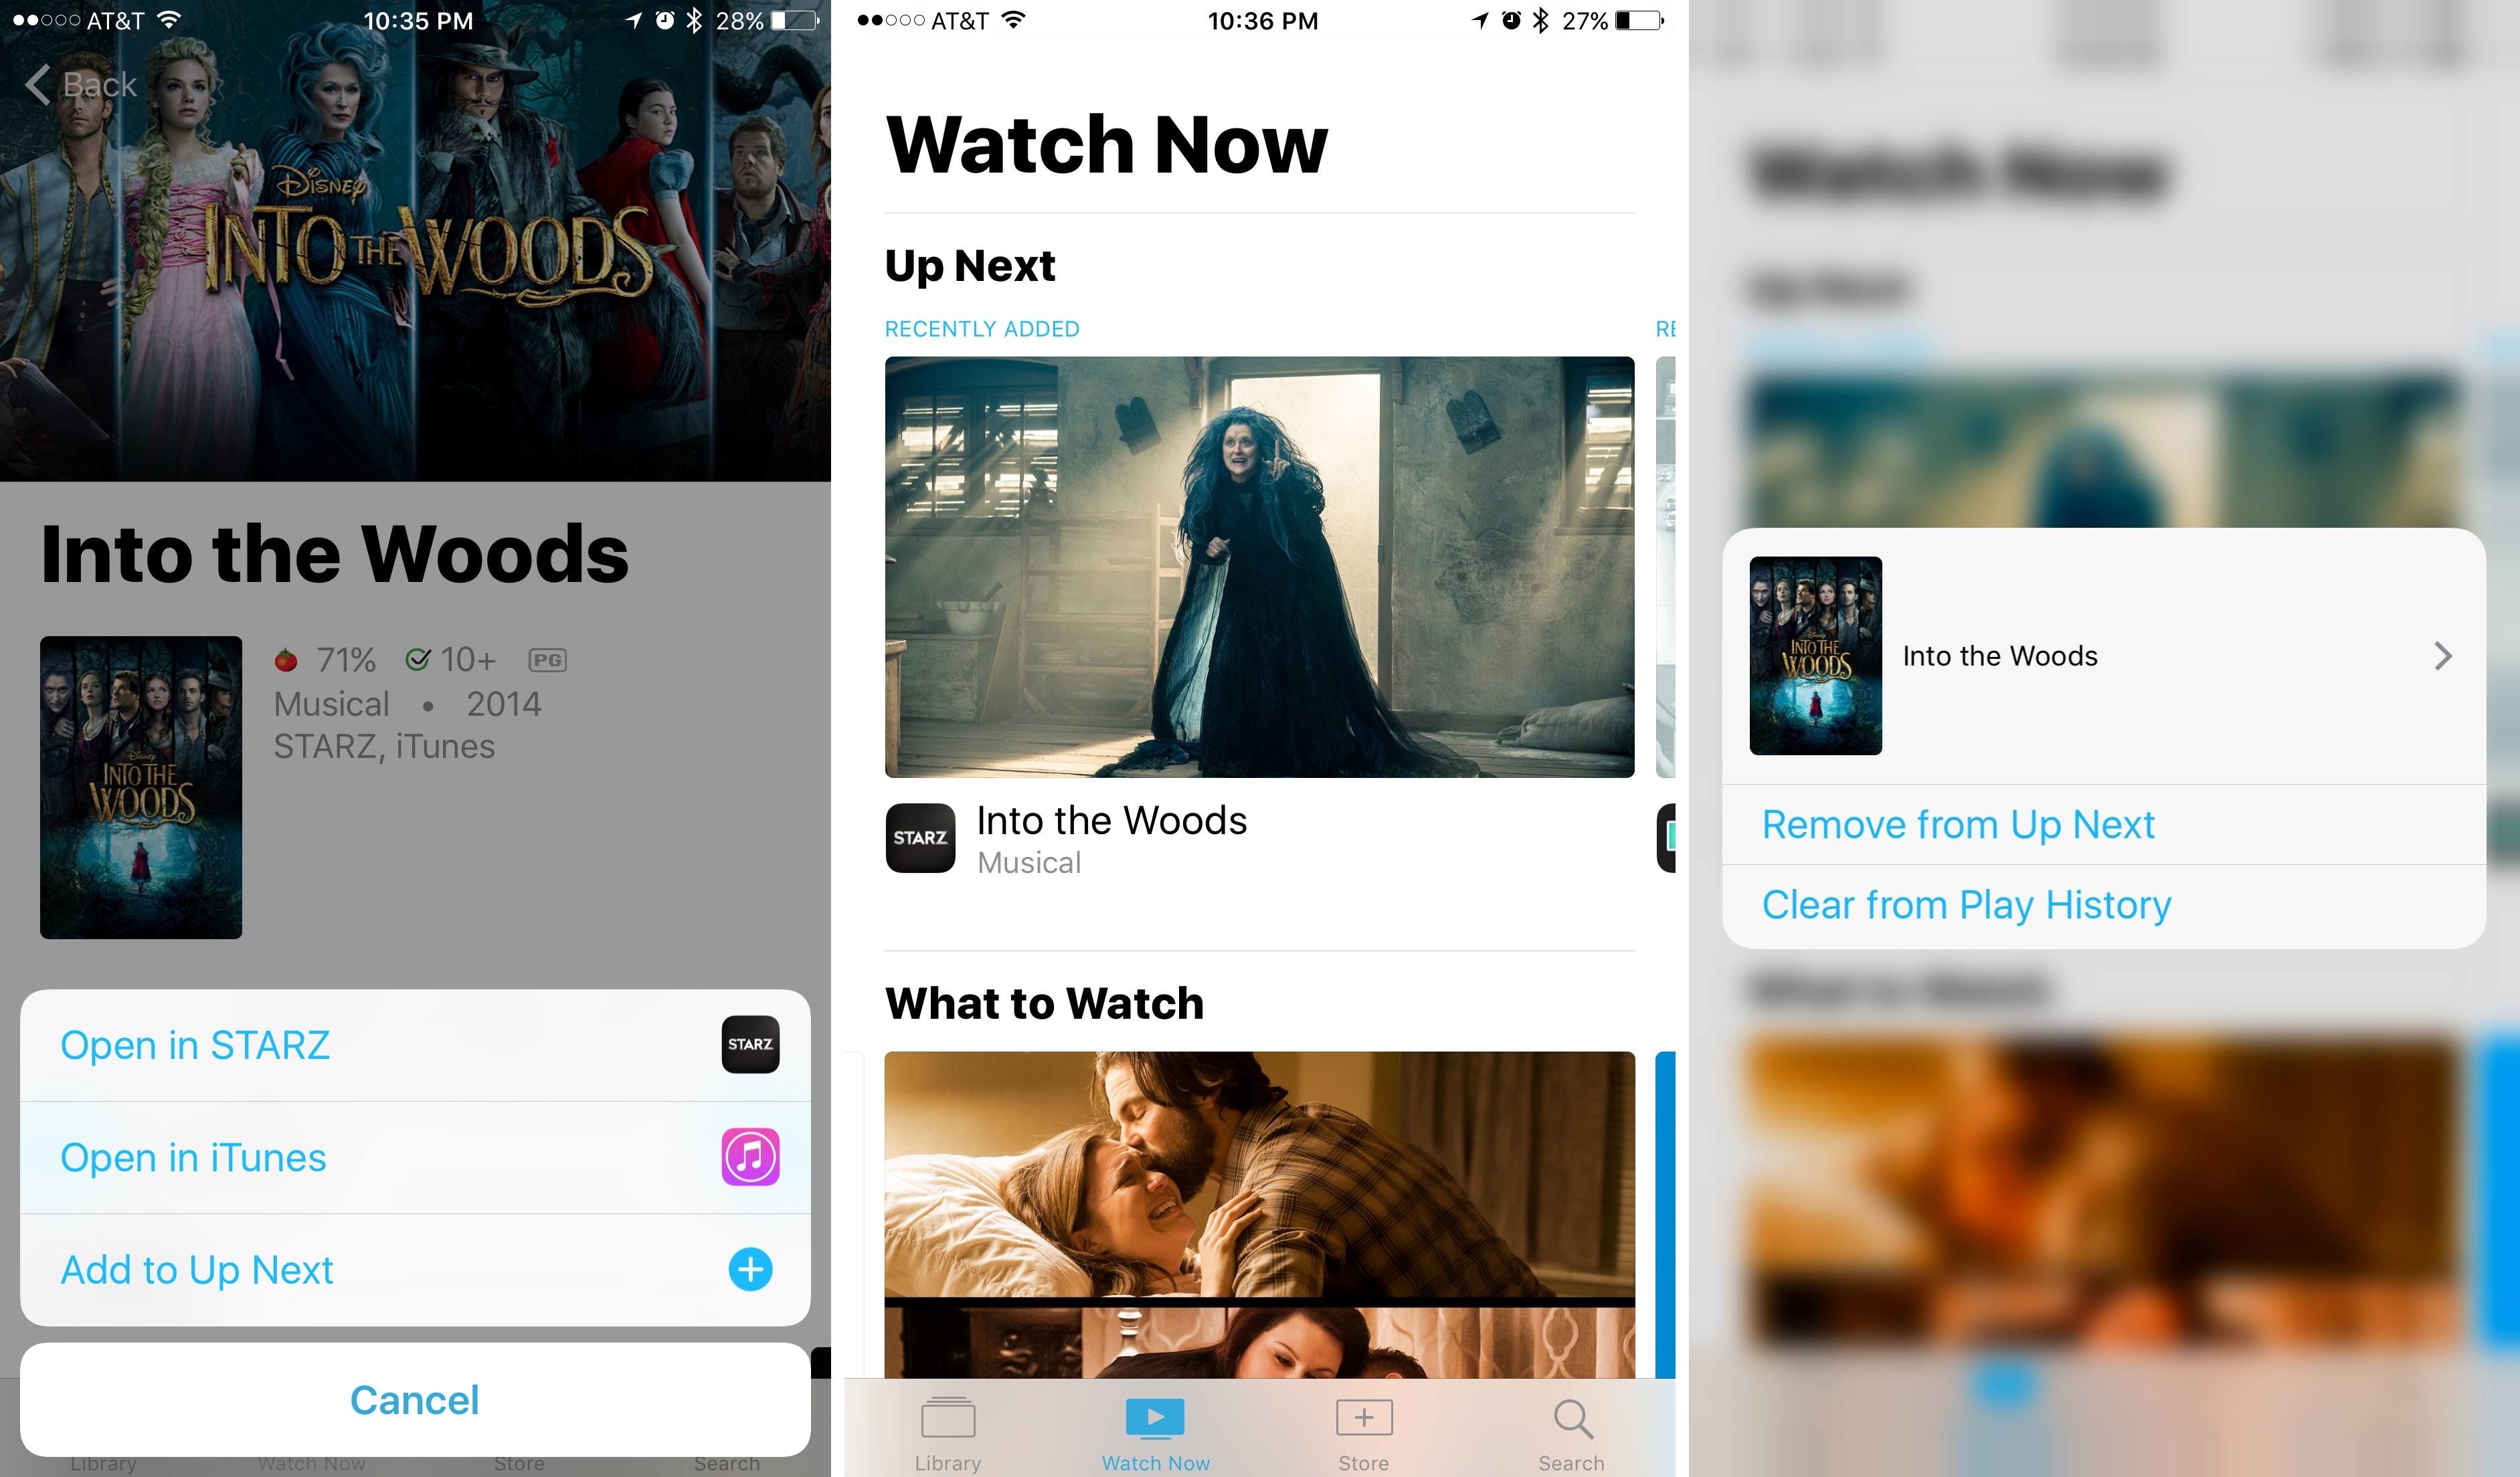 Videos can be added to Up Next from anywhere in the app